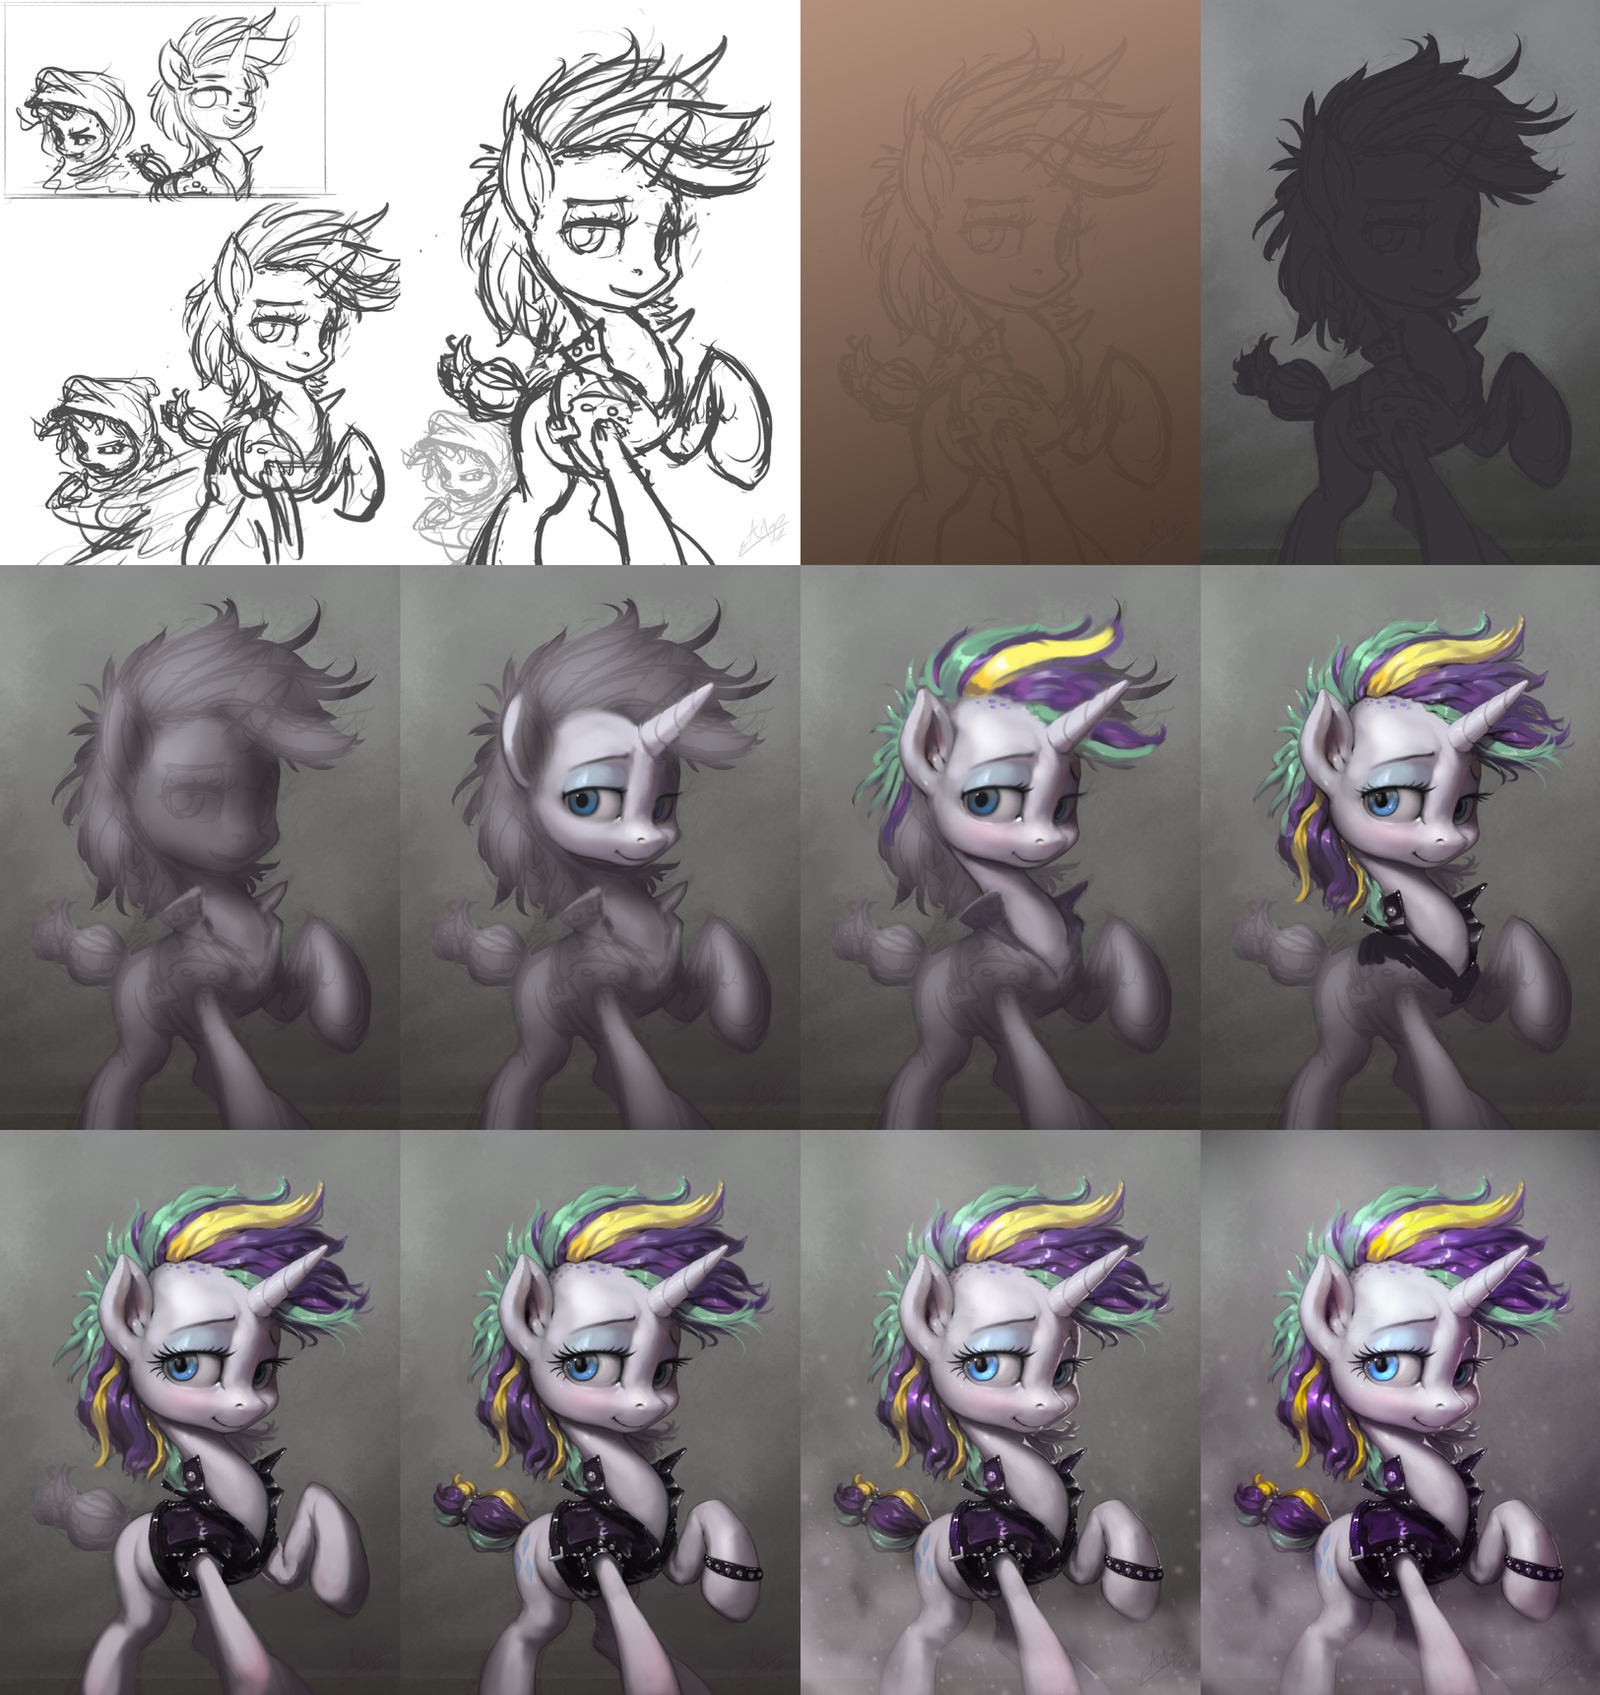 Removal to Rarity [WIP]